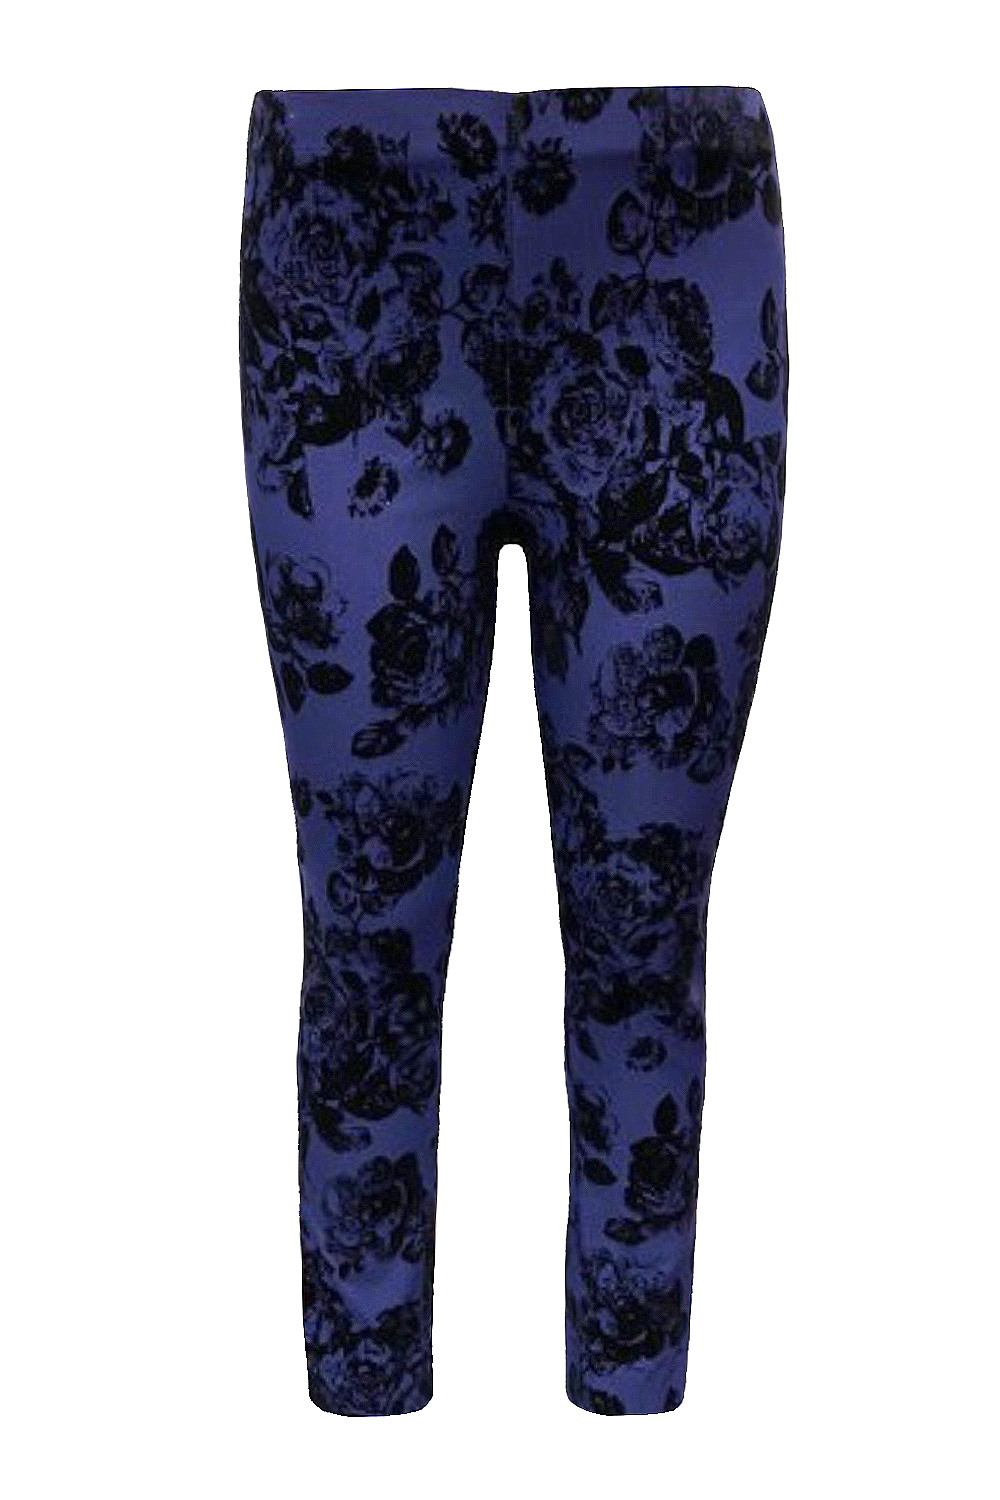 Midnight-Blue Flocked Full Length Stretch Trousers, Image 4 of 4